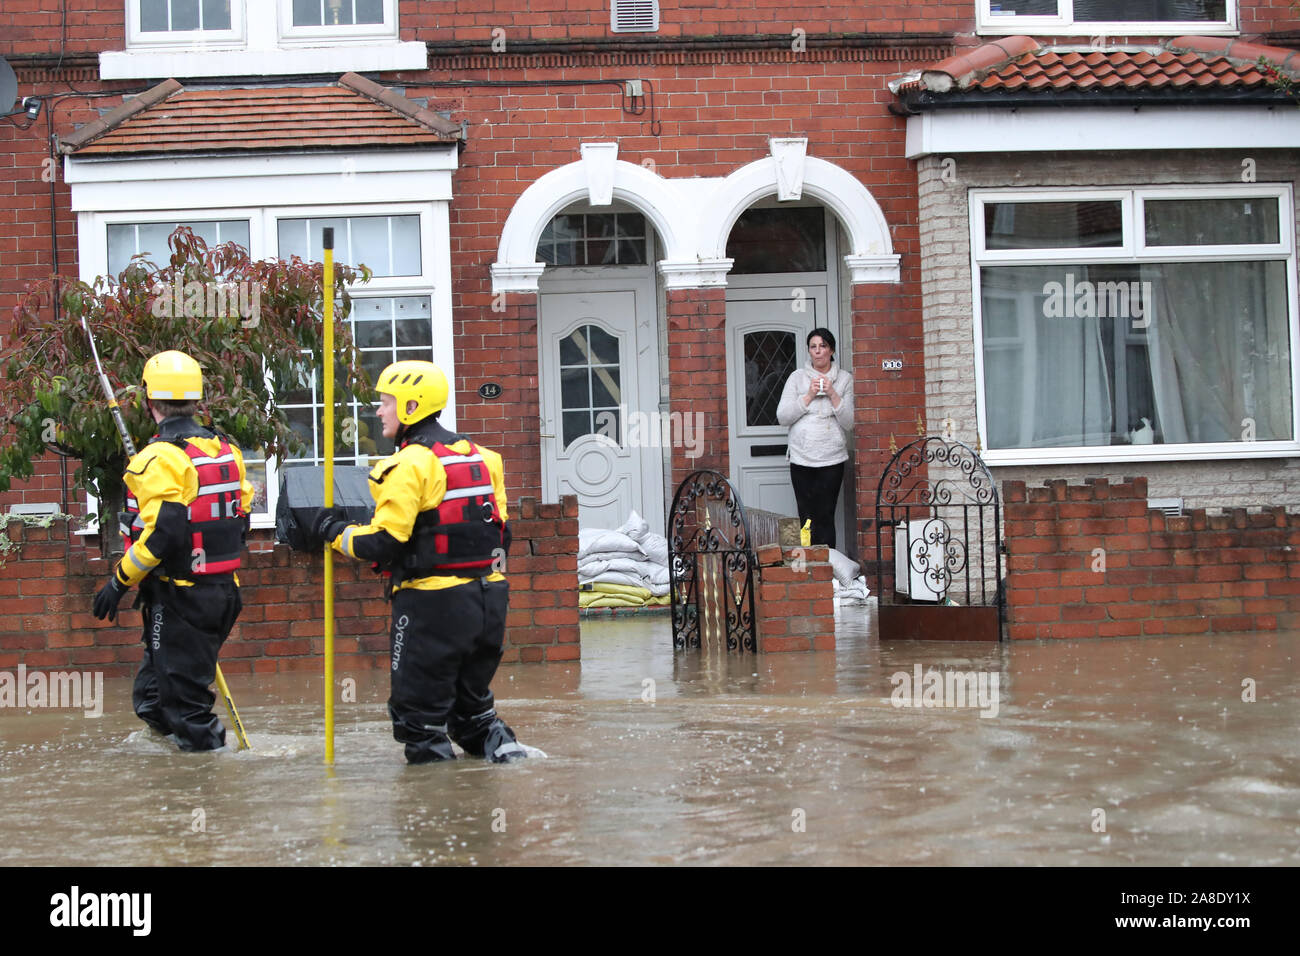 Fire and Rescue service members walk through flood water to rescue residents in Doncaster, Yorkshire, as parts of England endured a month's worth of rain in 24 hours, with scores of people rescued or forced to evacuate their homes, others stranded overnight in a shopping centre, and travel plans thrown into chaos. Stock Photo